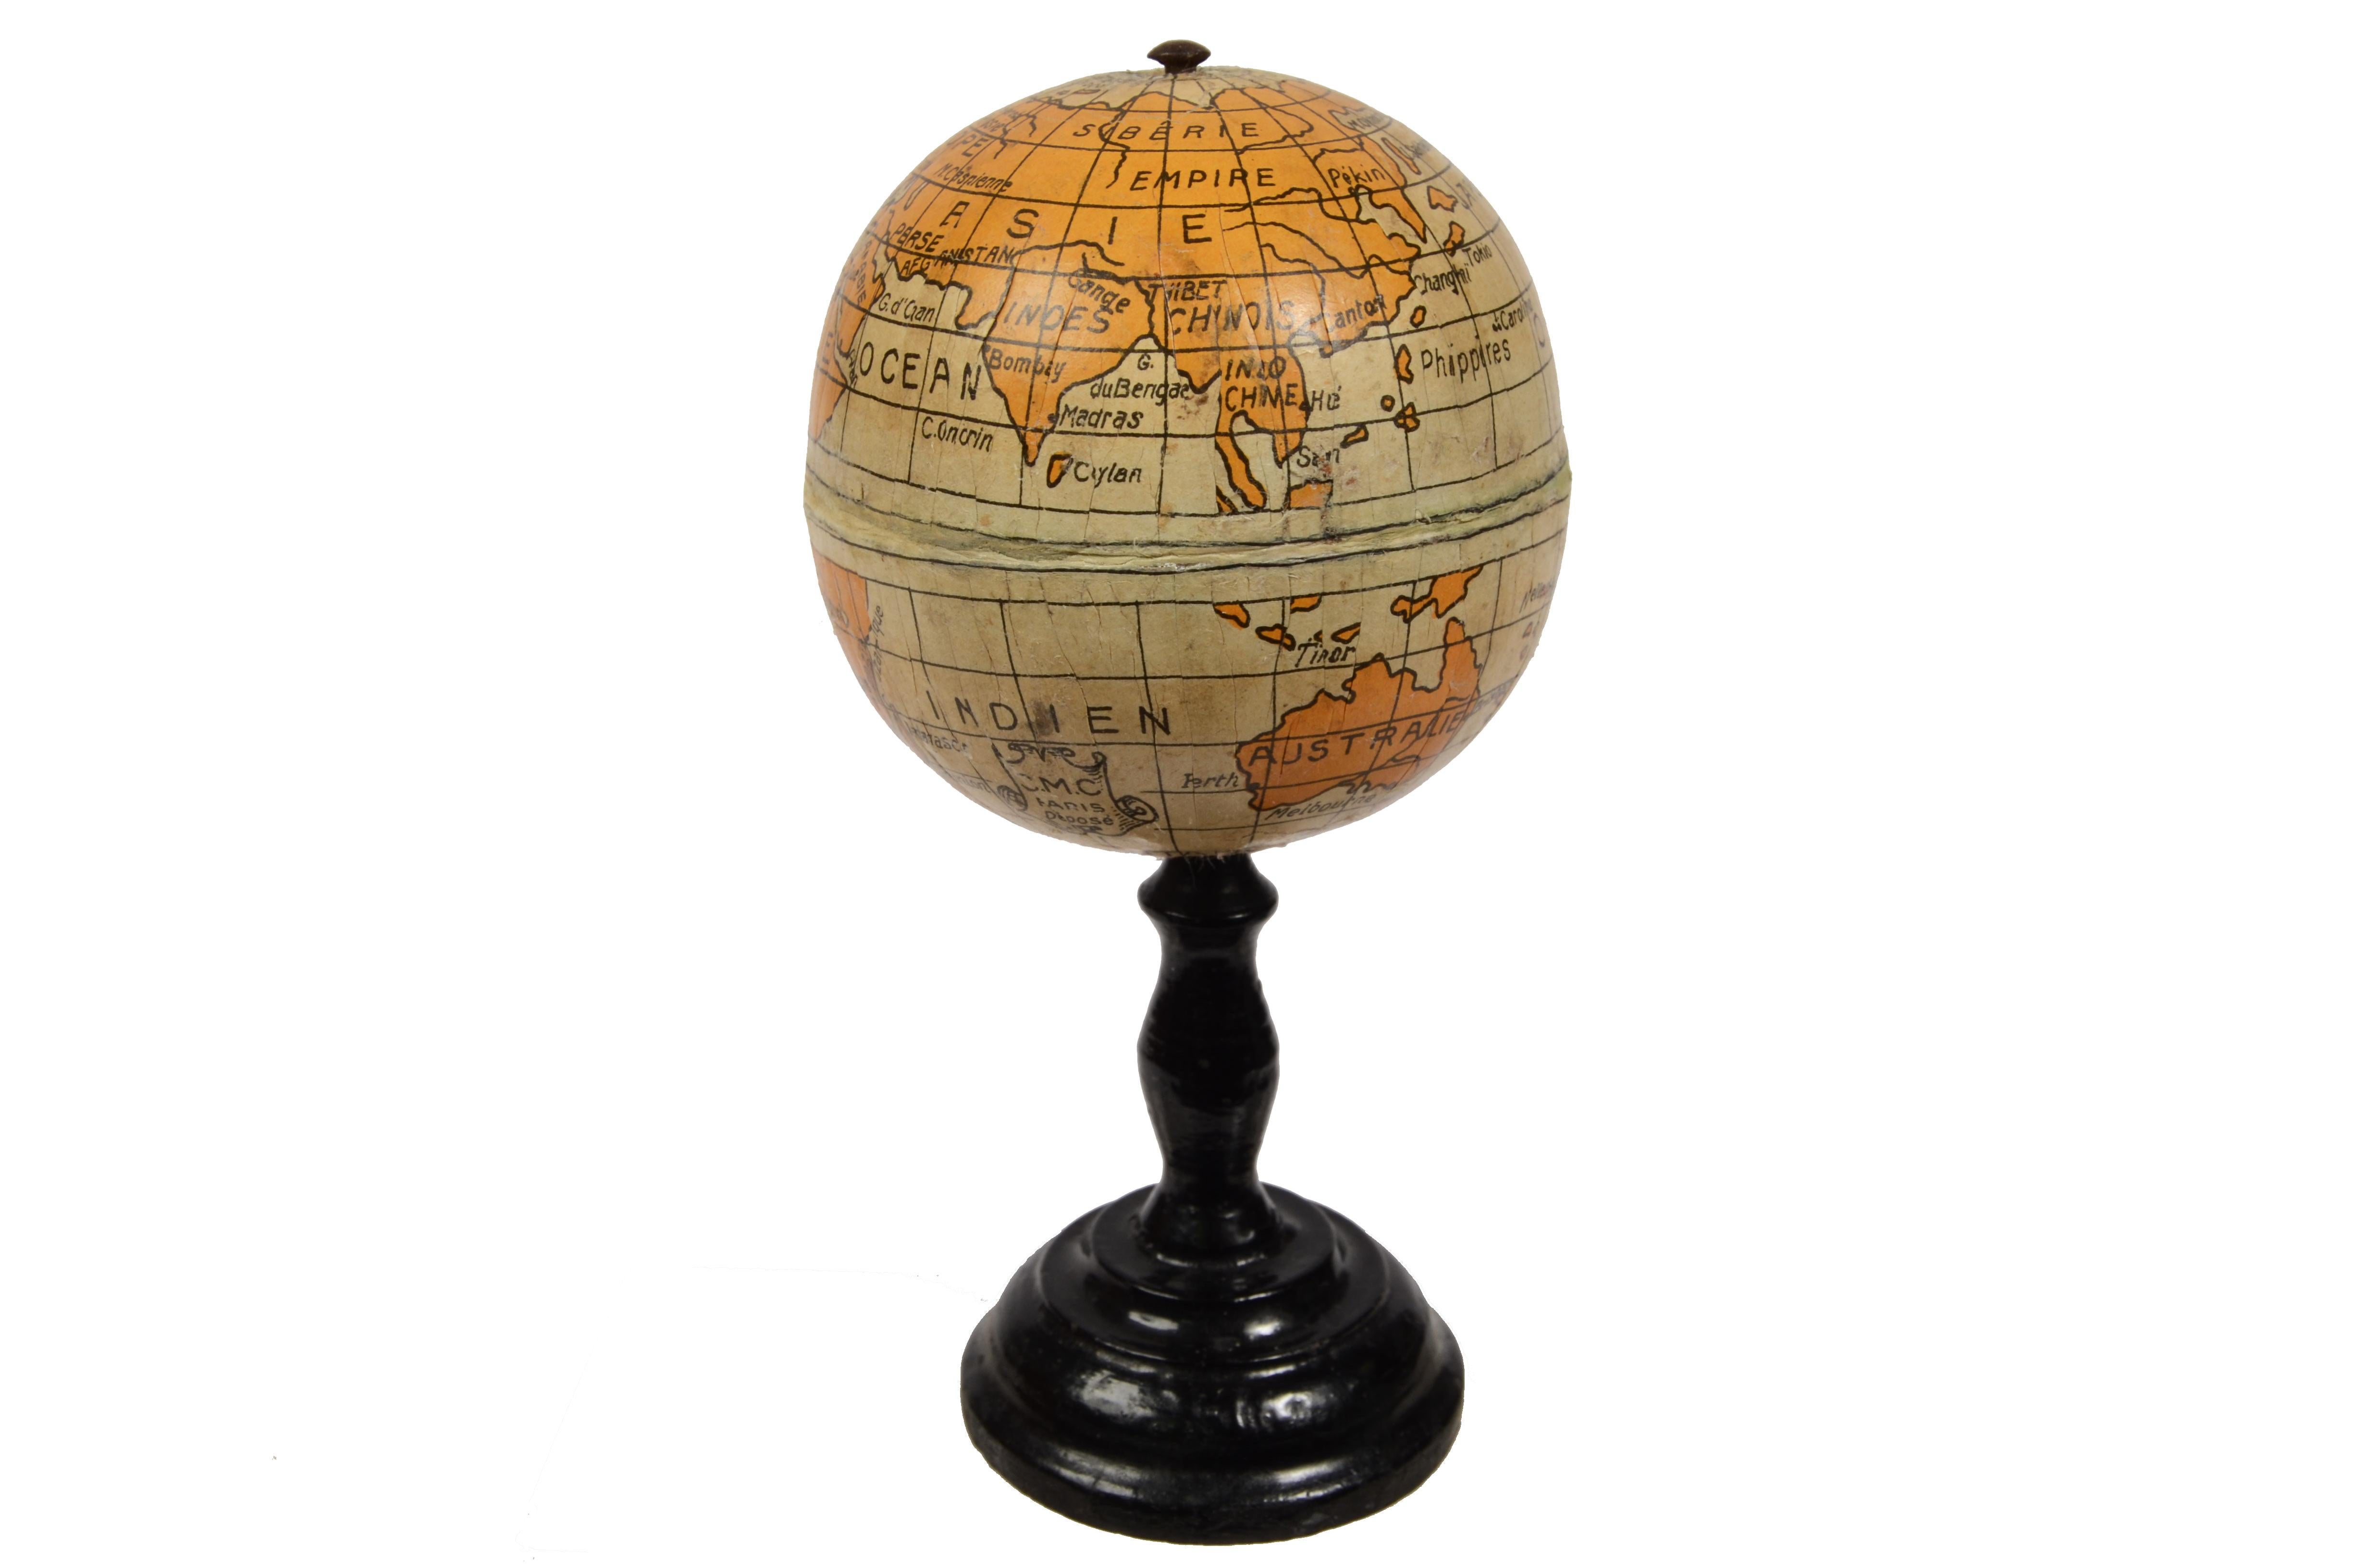 Small terrestrial globe signed C.M.C. Paris, end of XIX century. Papier maché sphere and turned and ebonized wooden base. Height cm 13 - inches 5.1, diameter of sphere cm 6,5 - inches 2.6. Very good condition.
Shipping is insured by Lloyd's London;